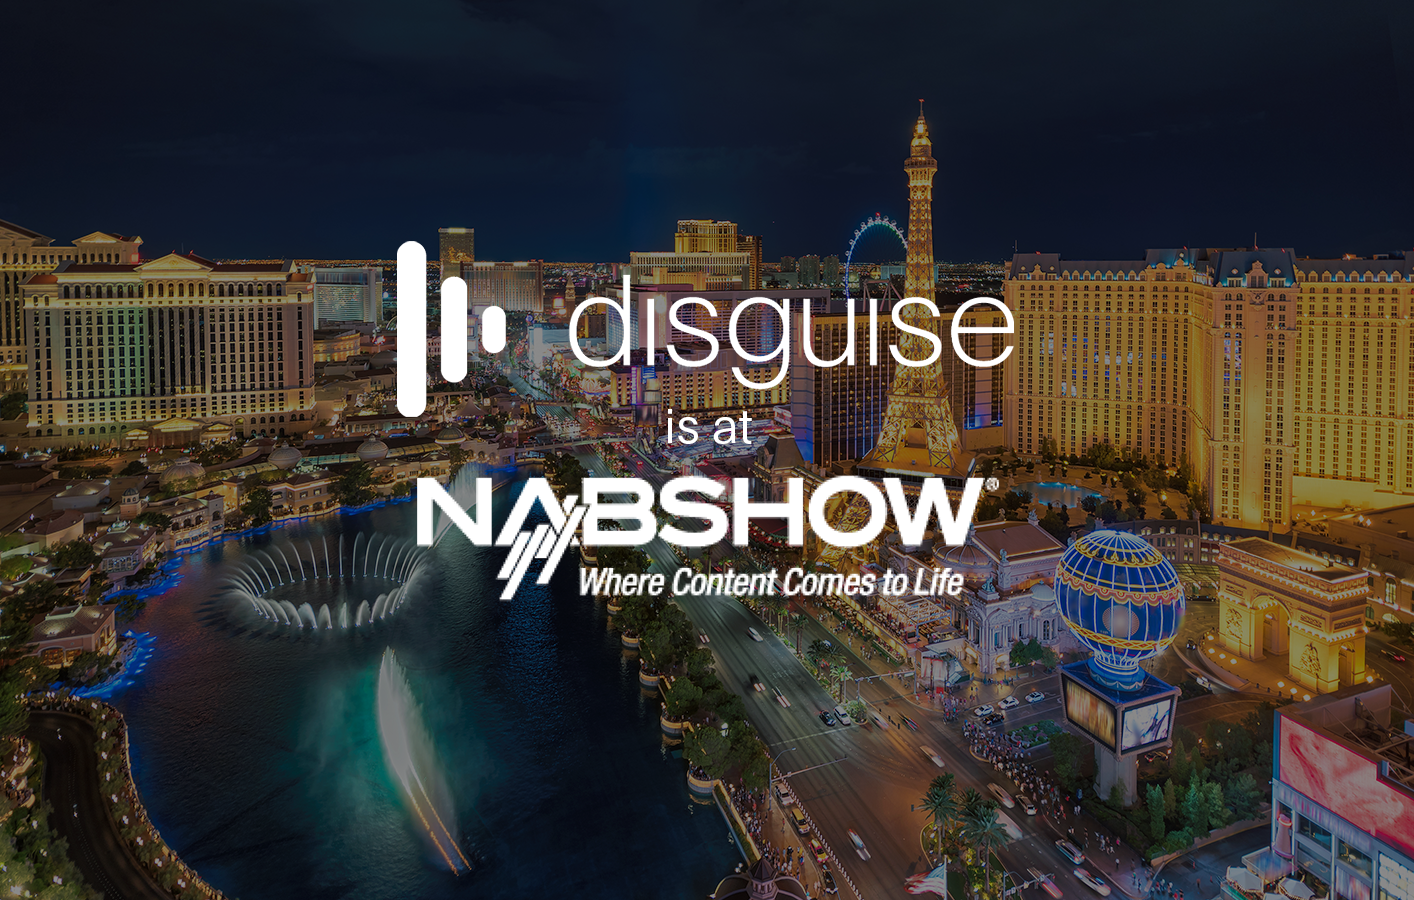 disguise will be showcasing extended reality technology at this year’s NAB Show